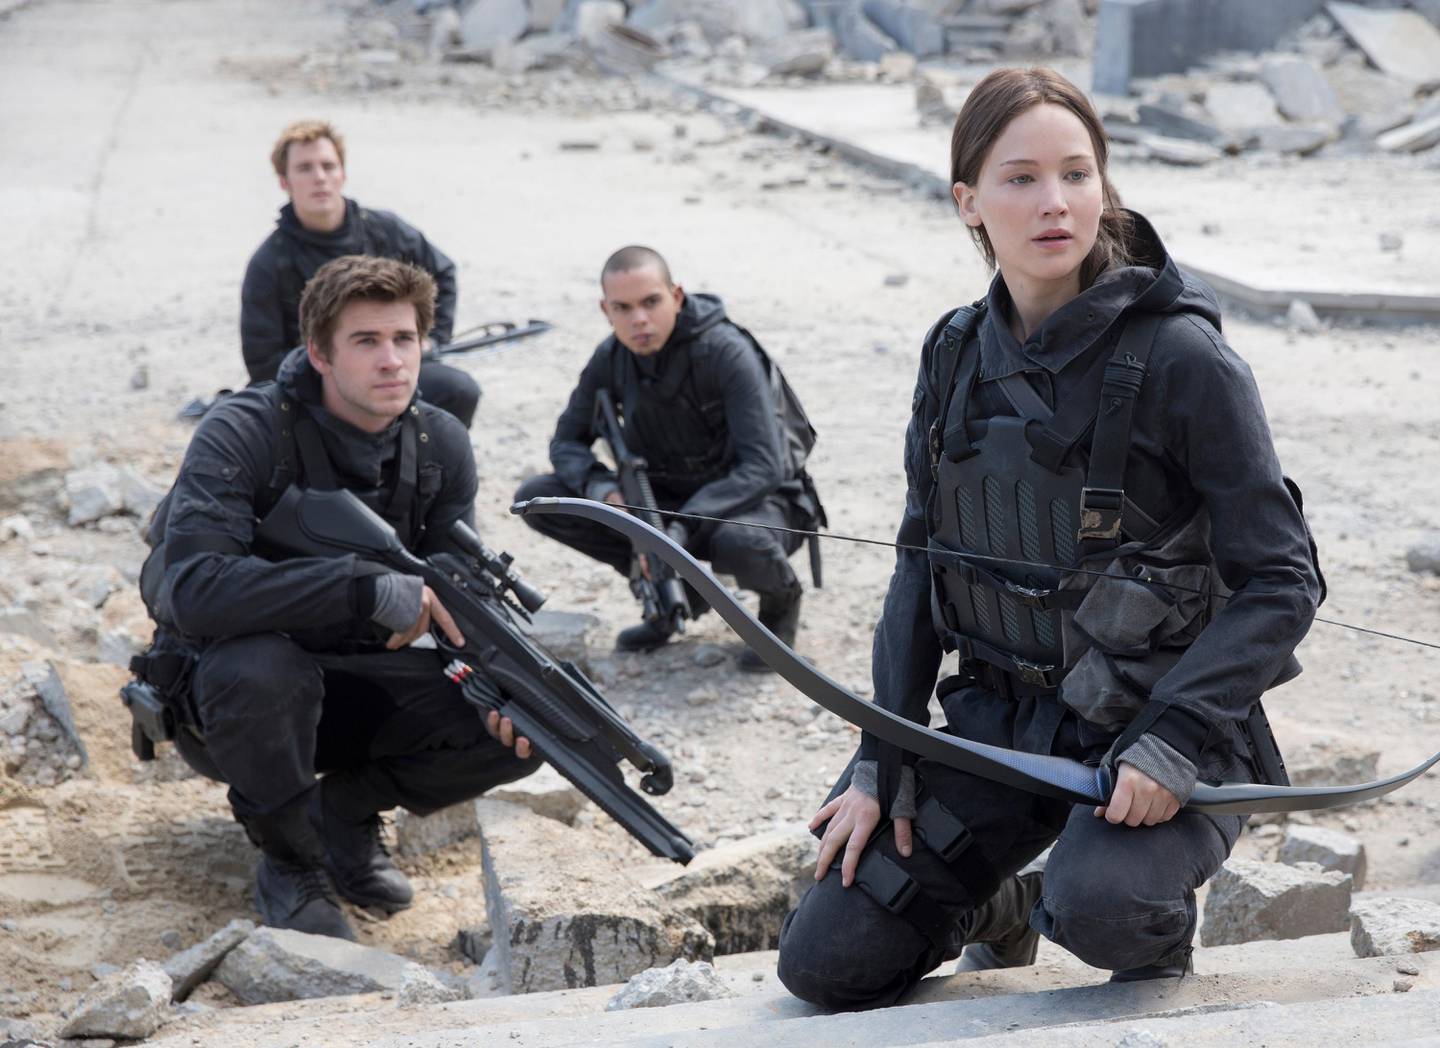 This photo provided by Lionsgate shows, Liam Hemsworth, left, as Gale Hawthorne, Sam Clafin, back left, as Finnick Odair, Evan Ross, back right, as Messalia, and Jennifer Lawrence, right, as Katniss Everdeen, in the film, "The Hunger Games: Mockingjay - Part 2."  Older kids can enjoy Lionsgate films free on its YouTube channel, with the dystopian films The Hunger Games.  (Murray Close/Lionsgate via AP)